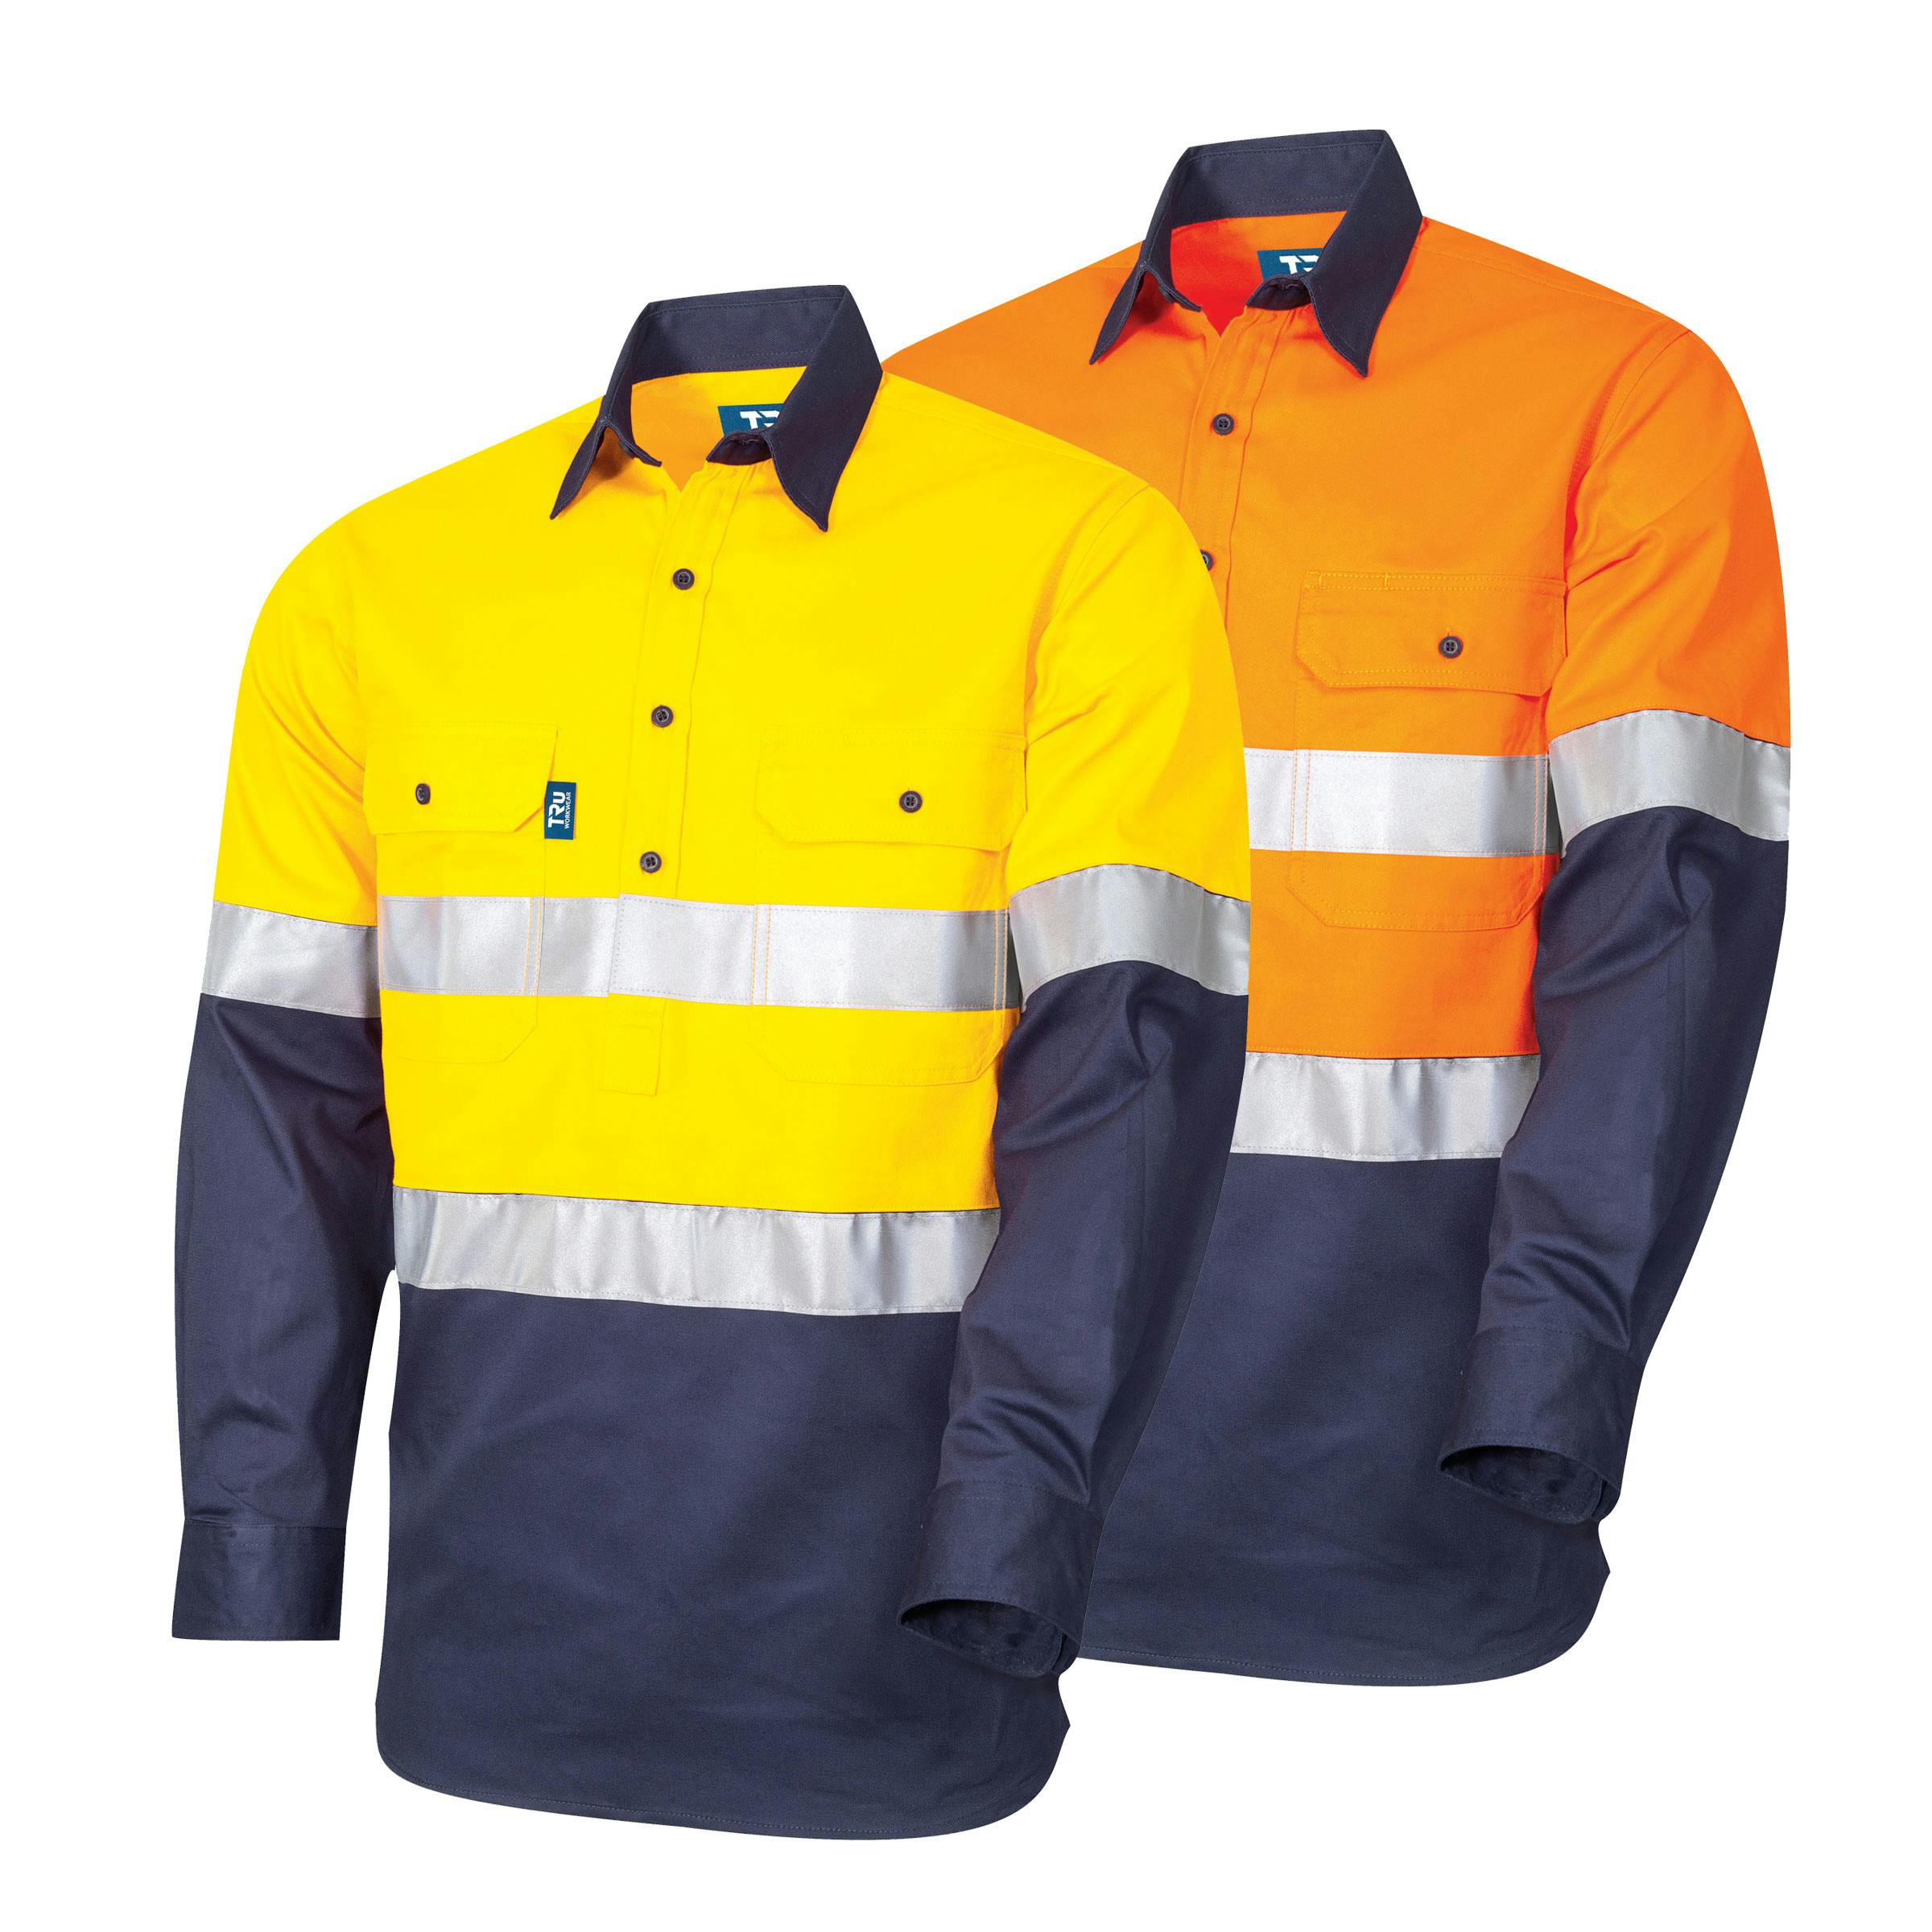 TRu Workwear Shirt 160gsm Closed Front L/S Gusset Cuffs Two Tone Cotton Drill With Horz Vents And 3M Two Hoop Reflective Tape